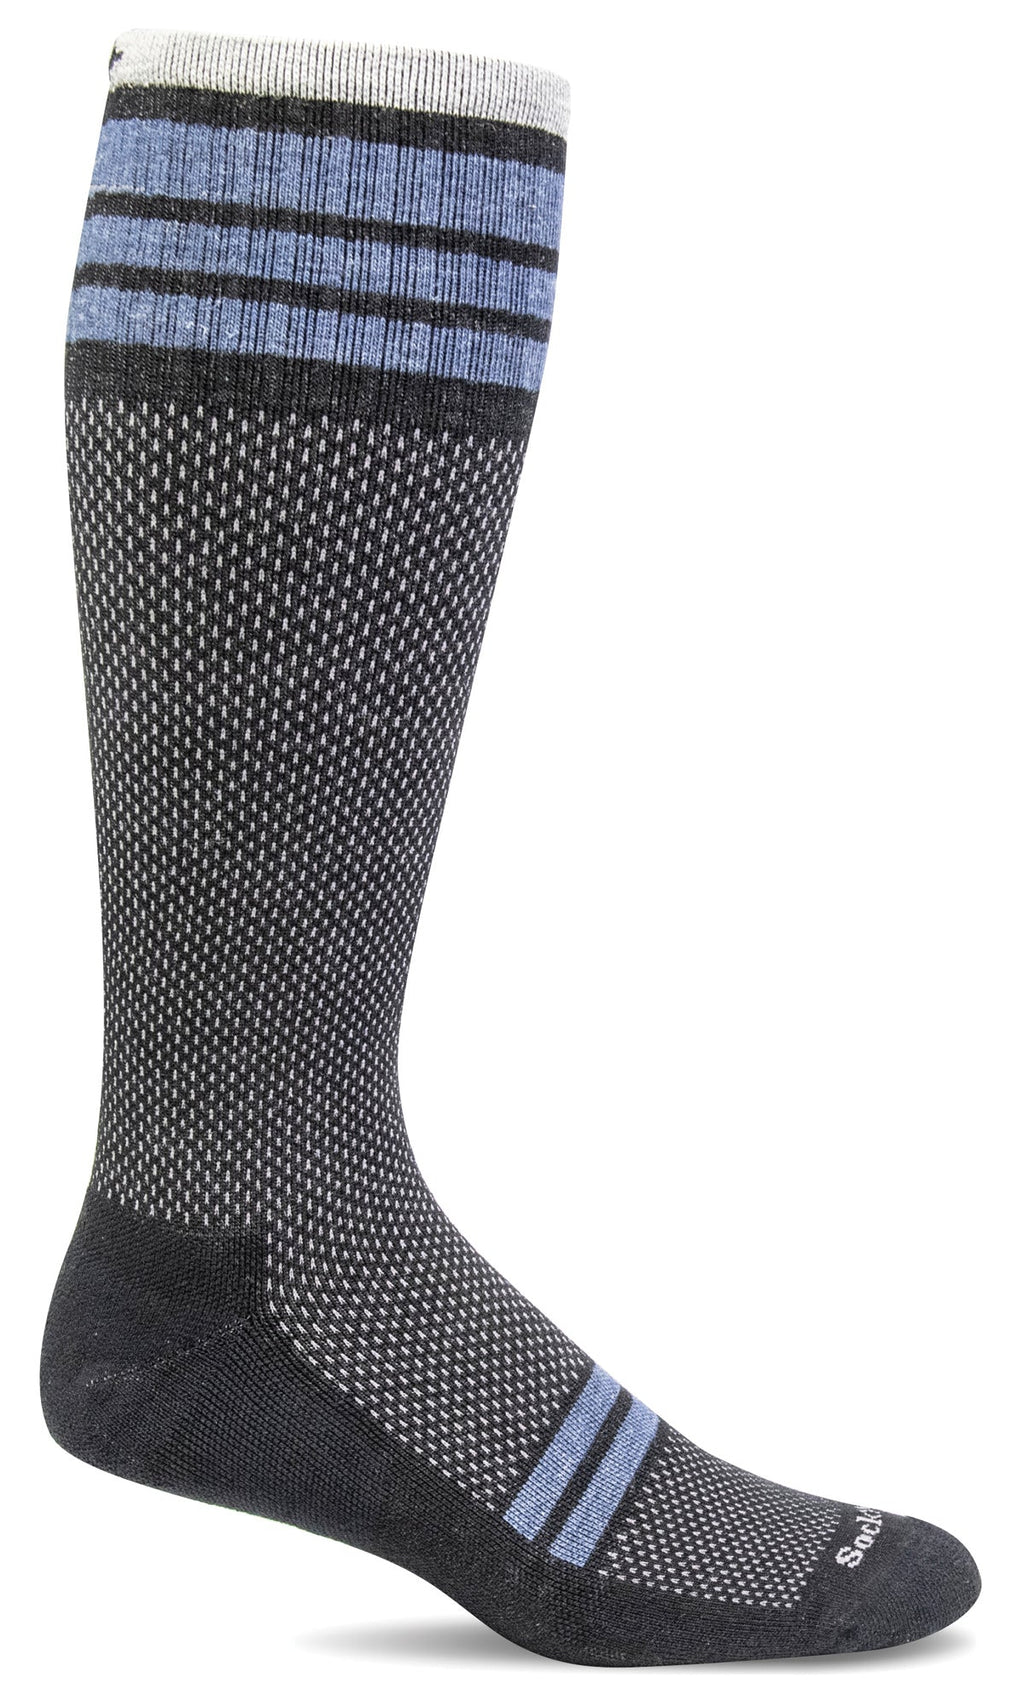 Men's Speedway | Firm Graduated Compression Socks - Merino Wool Lifestyle Compression - Sockwell